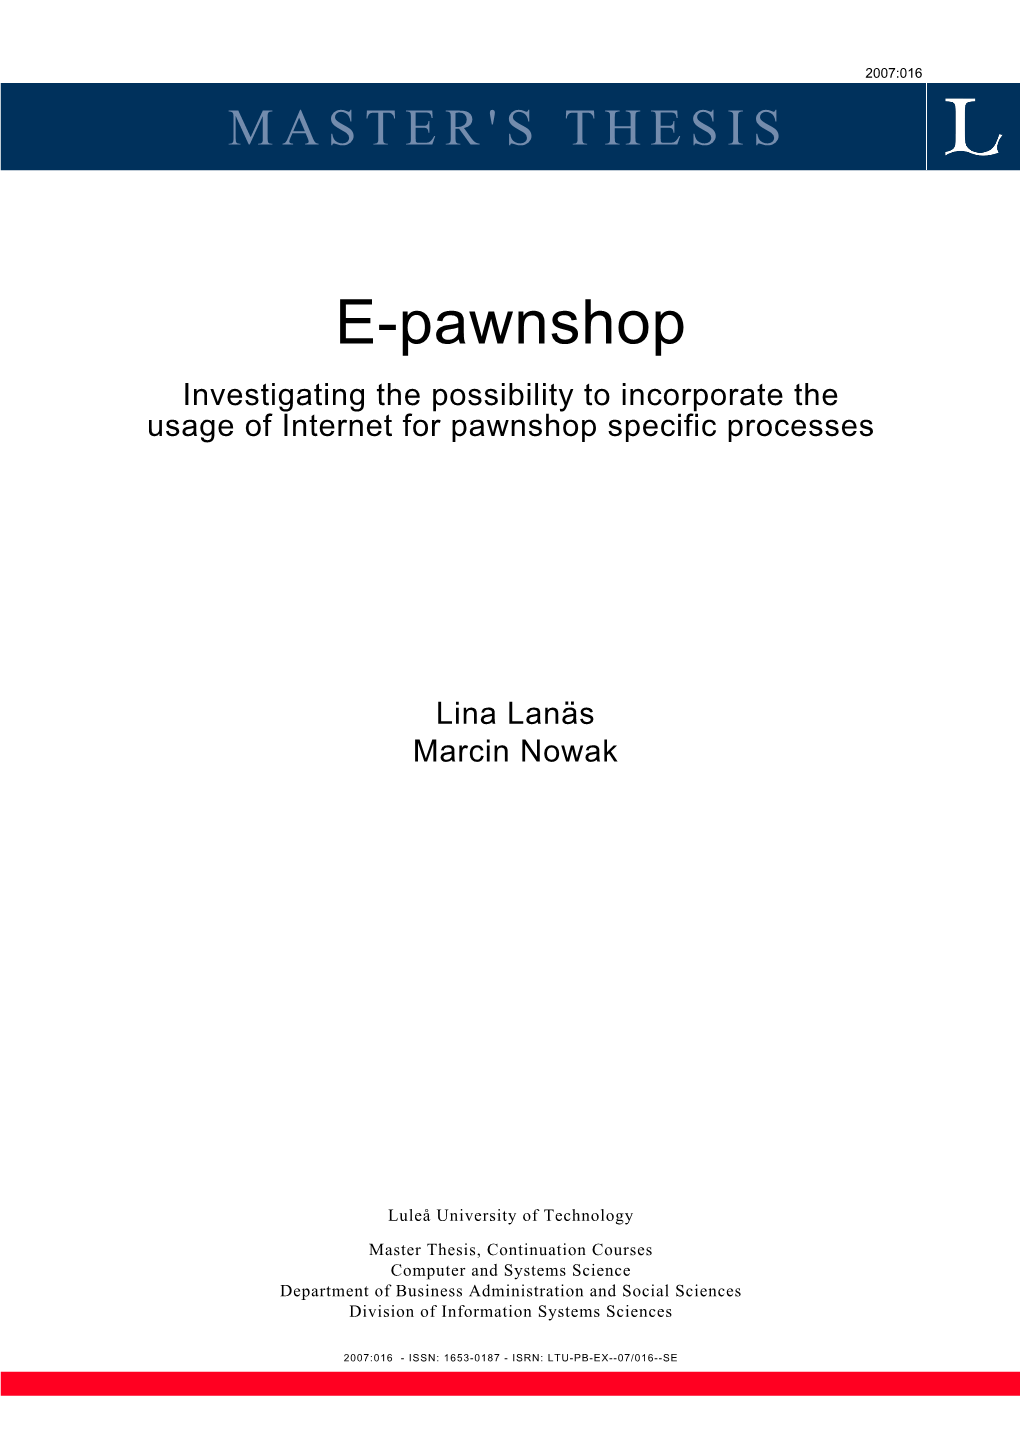 E-Pawnshop Investigating the Possibility to Incorporate the Usage of Internet for Pawnshop Specific Processes